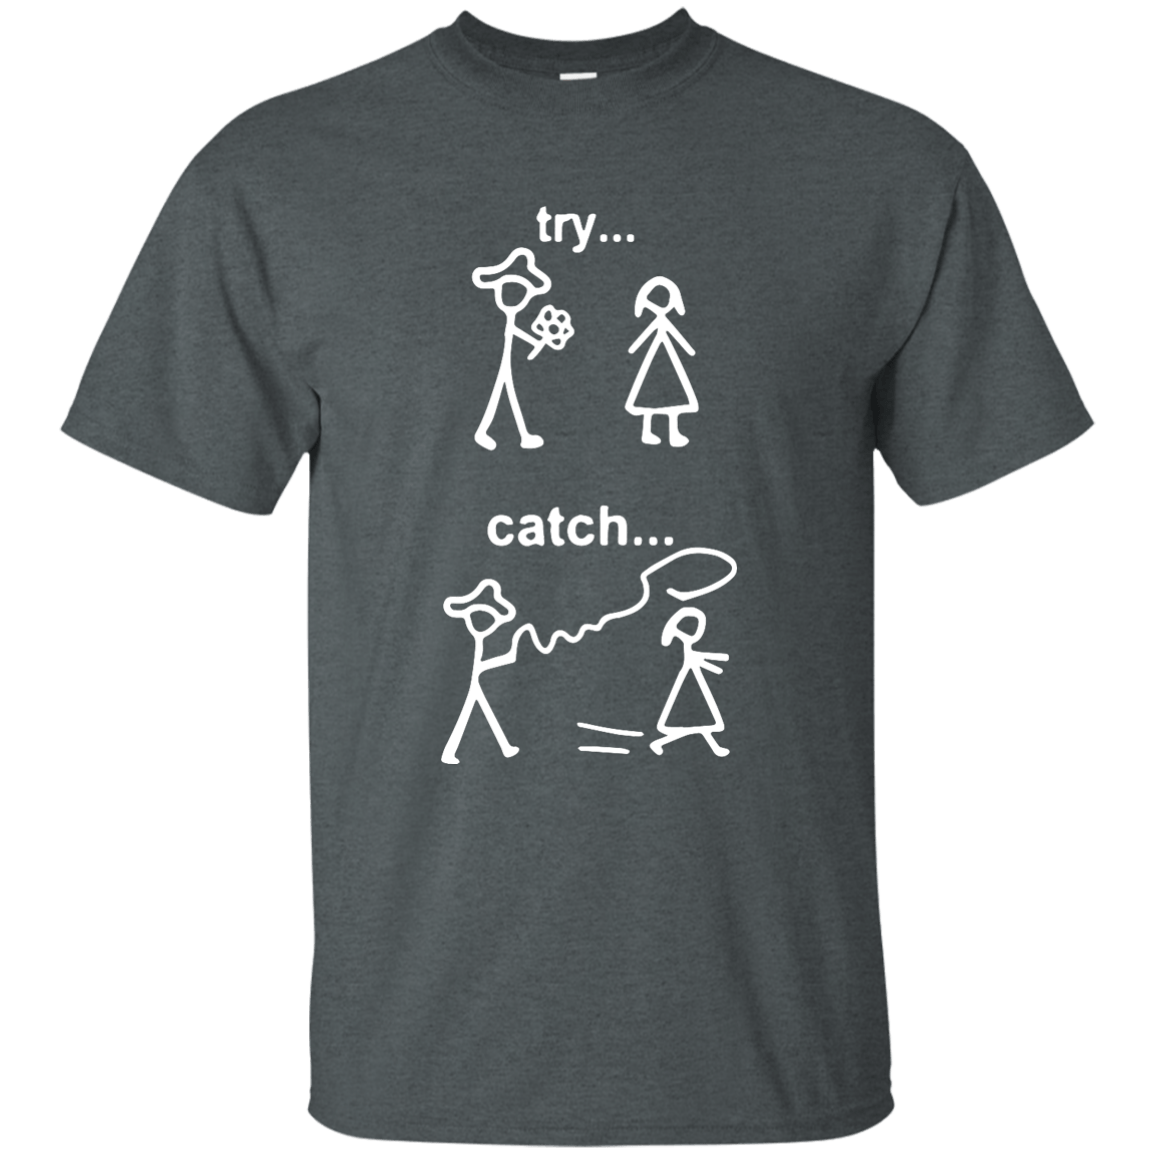 try catch – Tee++ 1 No. T-Shirts | in Programming